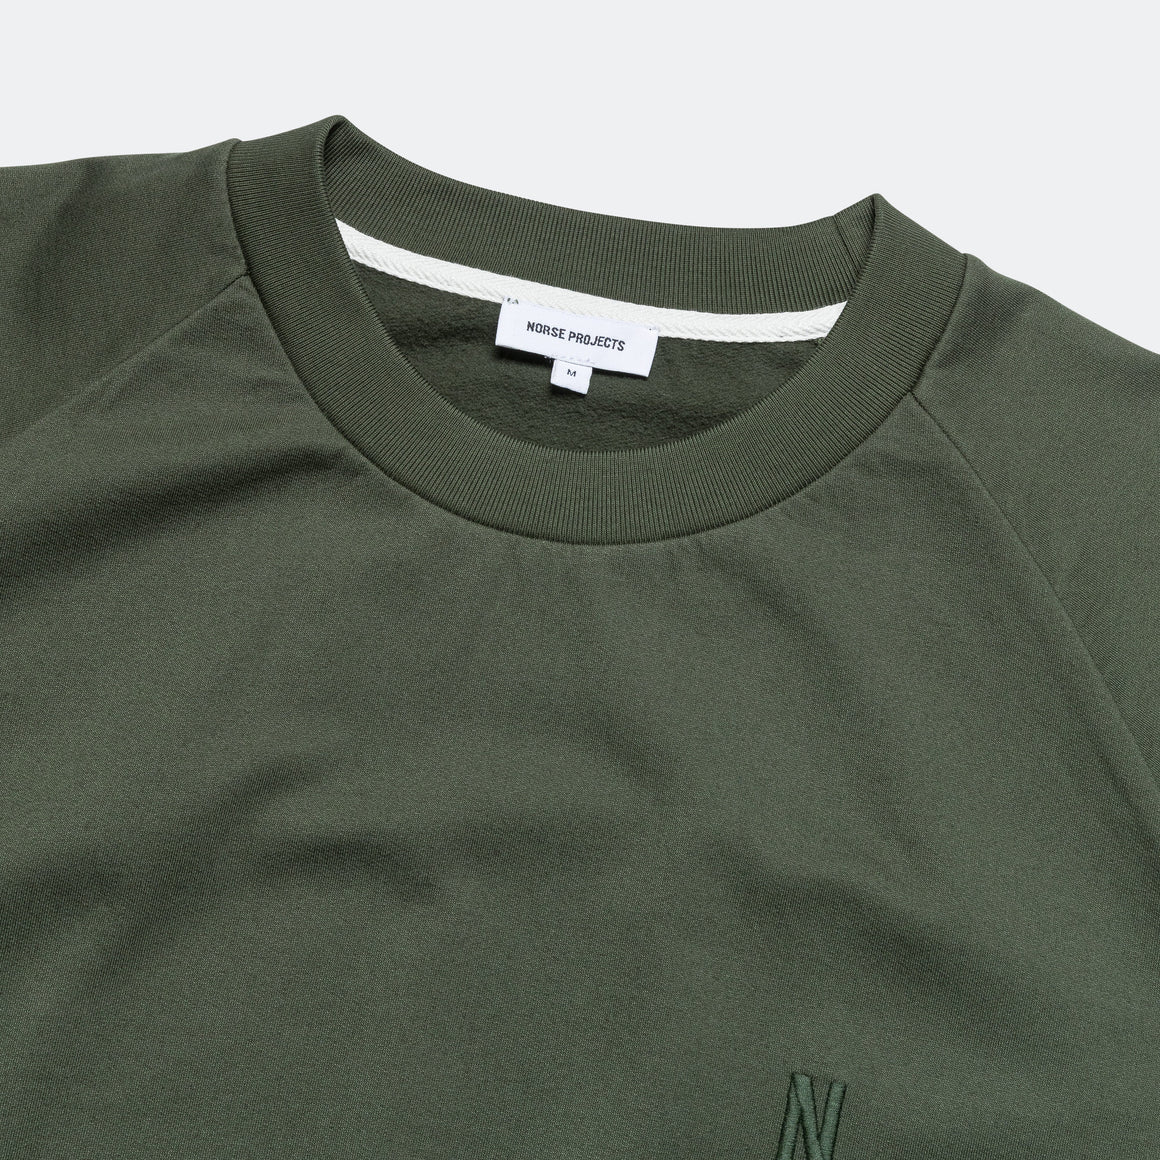 Norse Projects - Marten Relaxed Organic Raglan Light Sweatshirt - Spruce Green - UP THERE